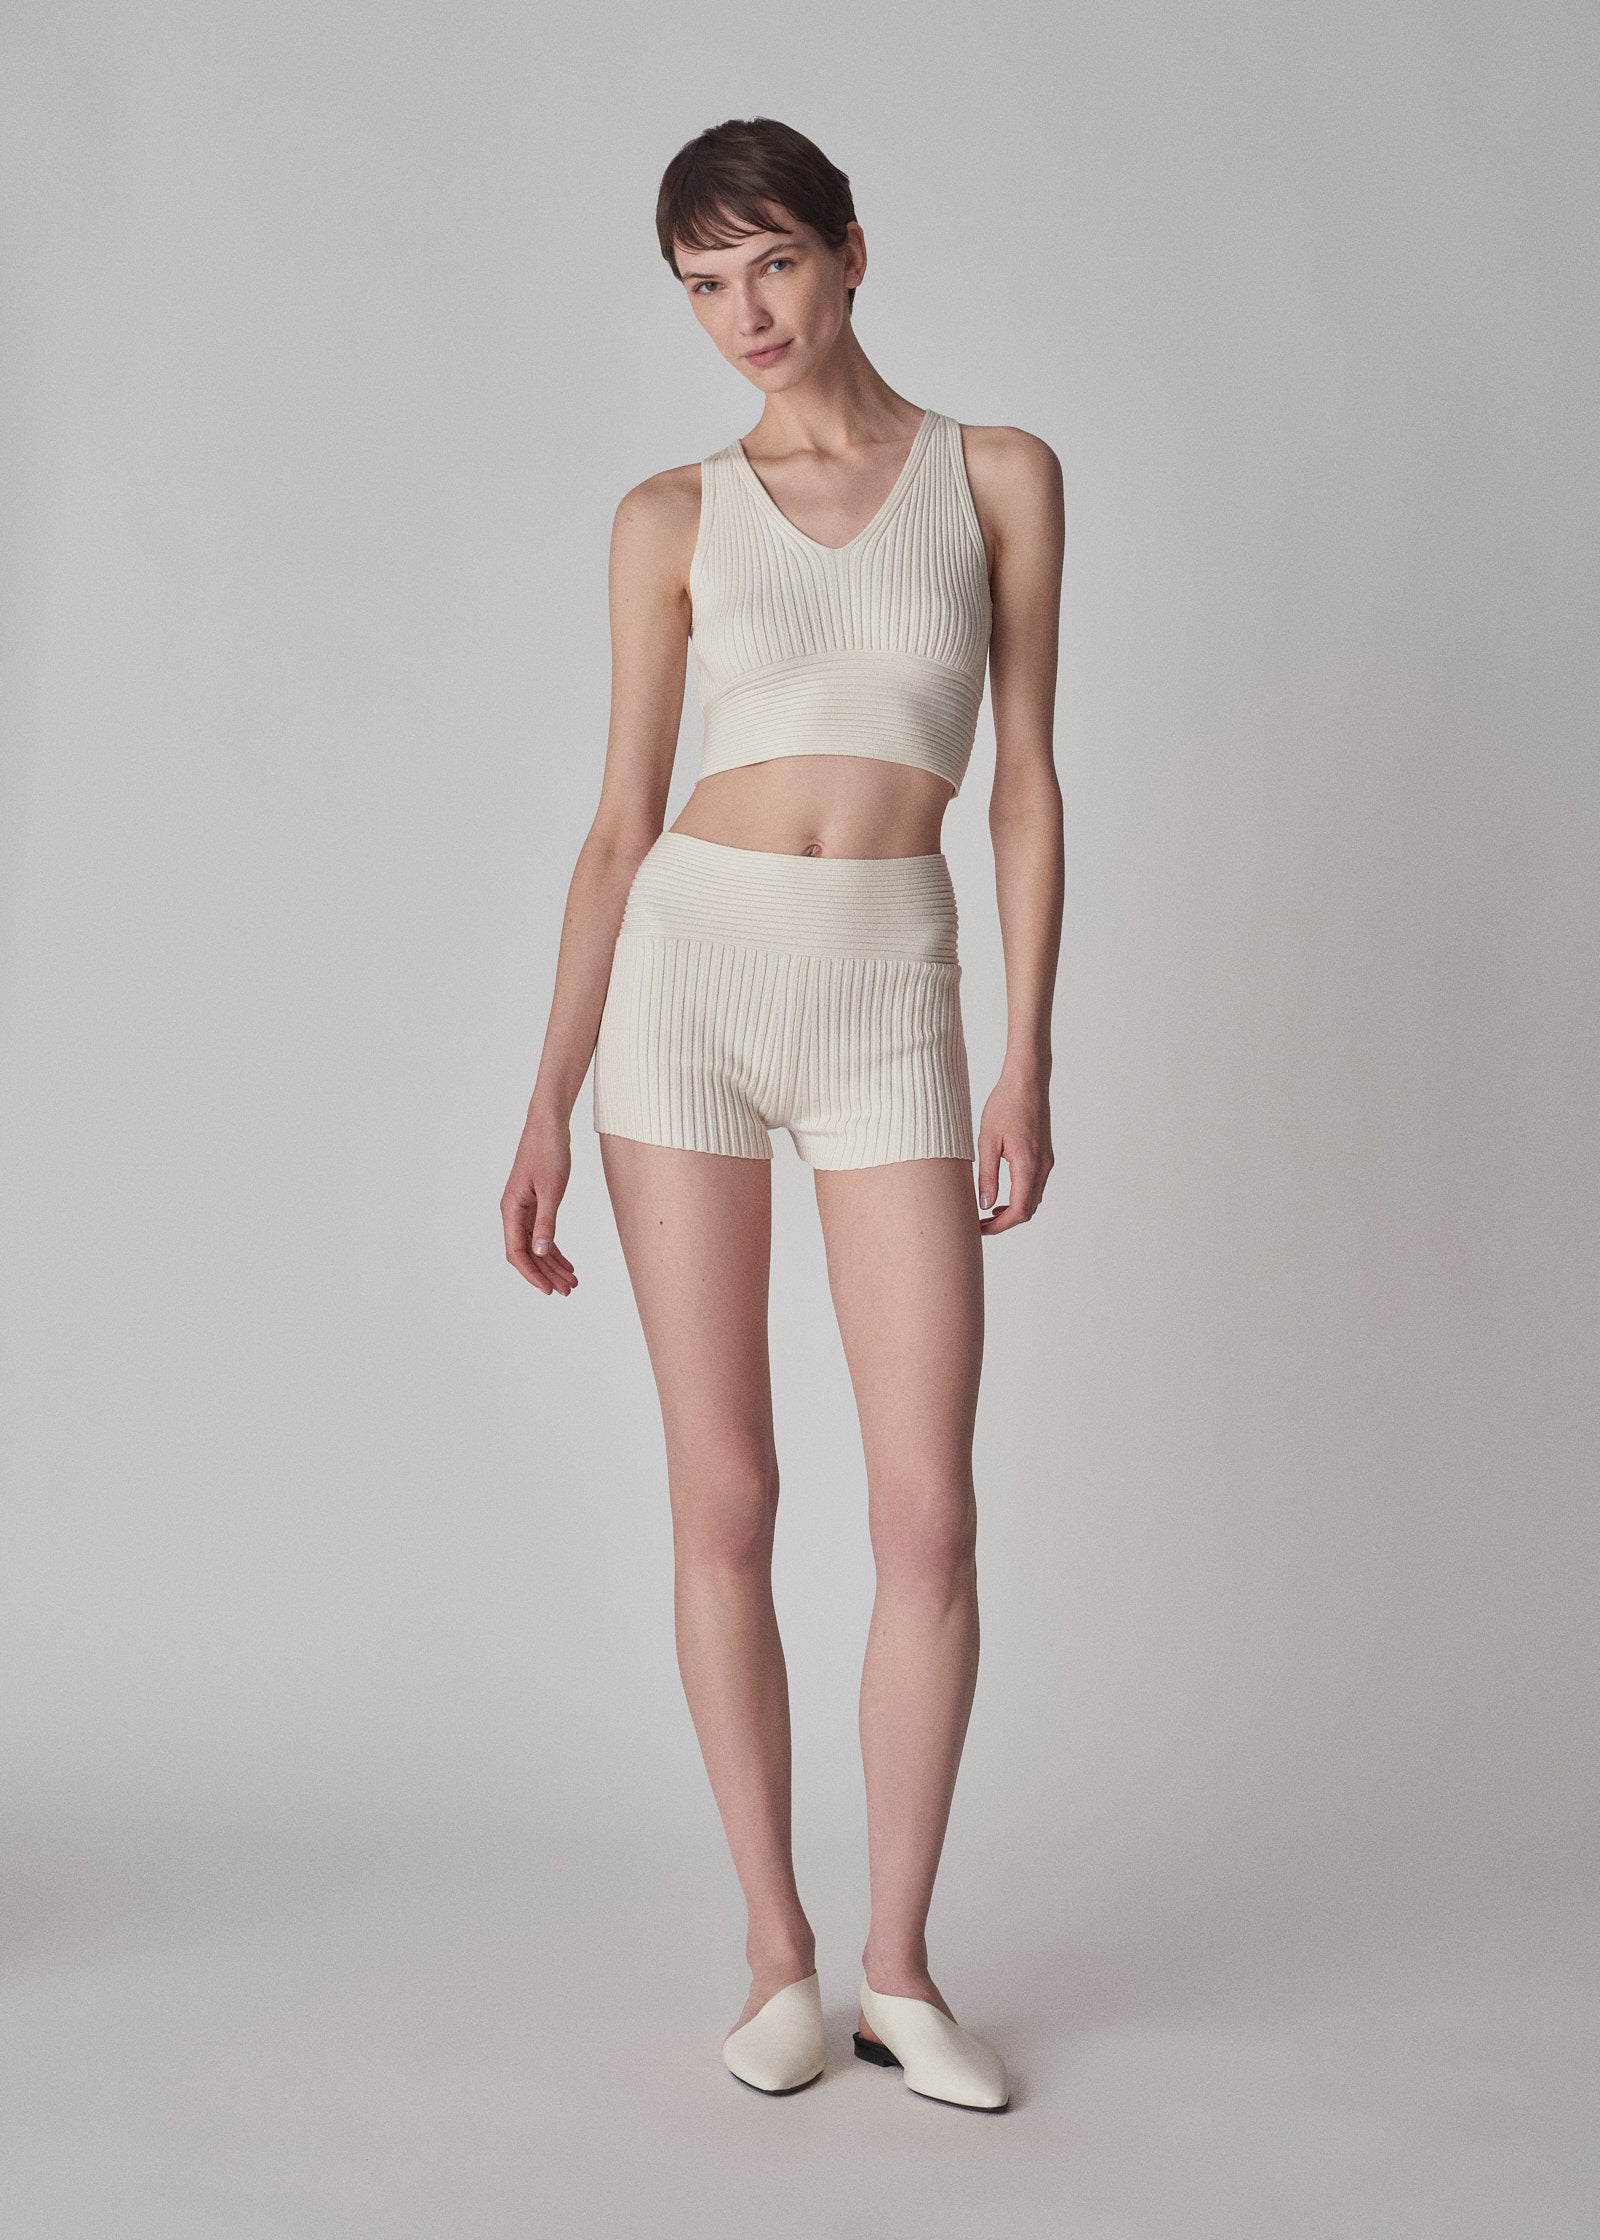 Bralette in Rib Silk Knit - Ivory - CO Collections